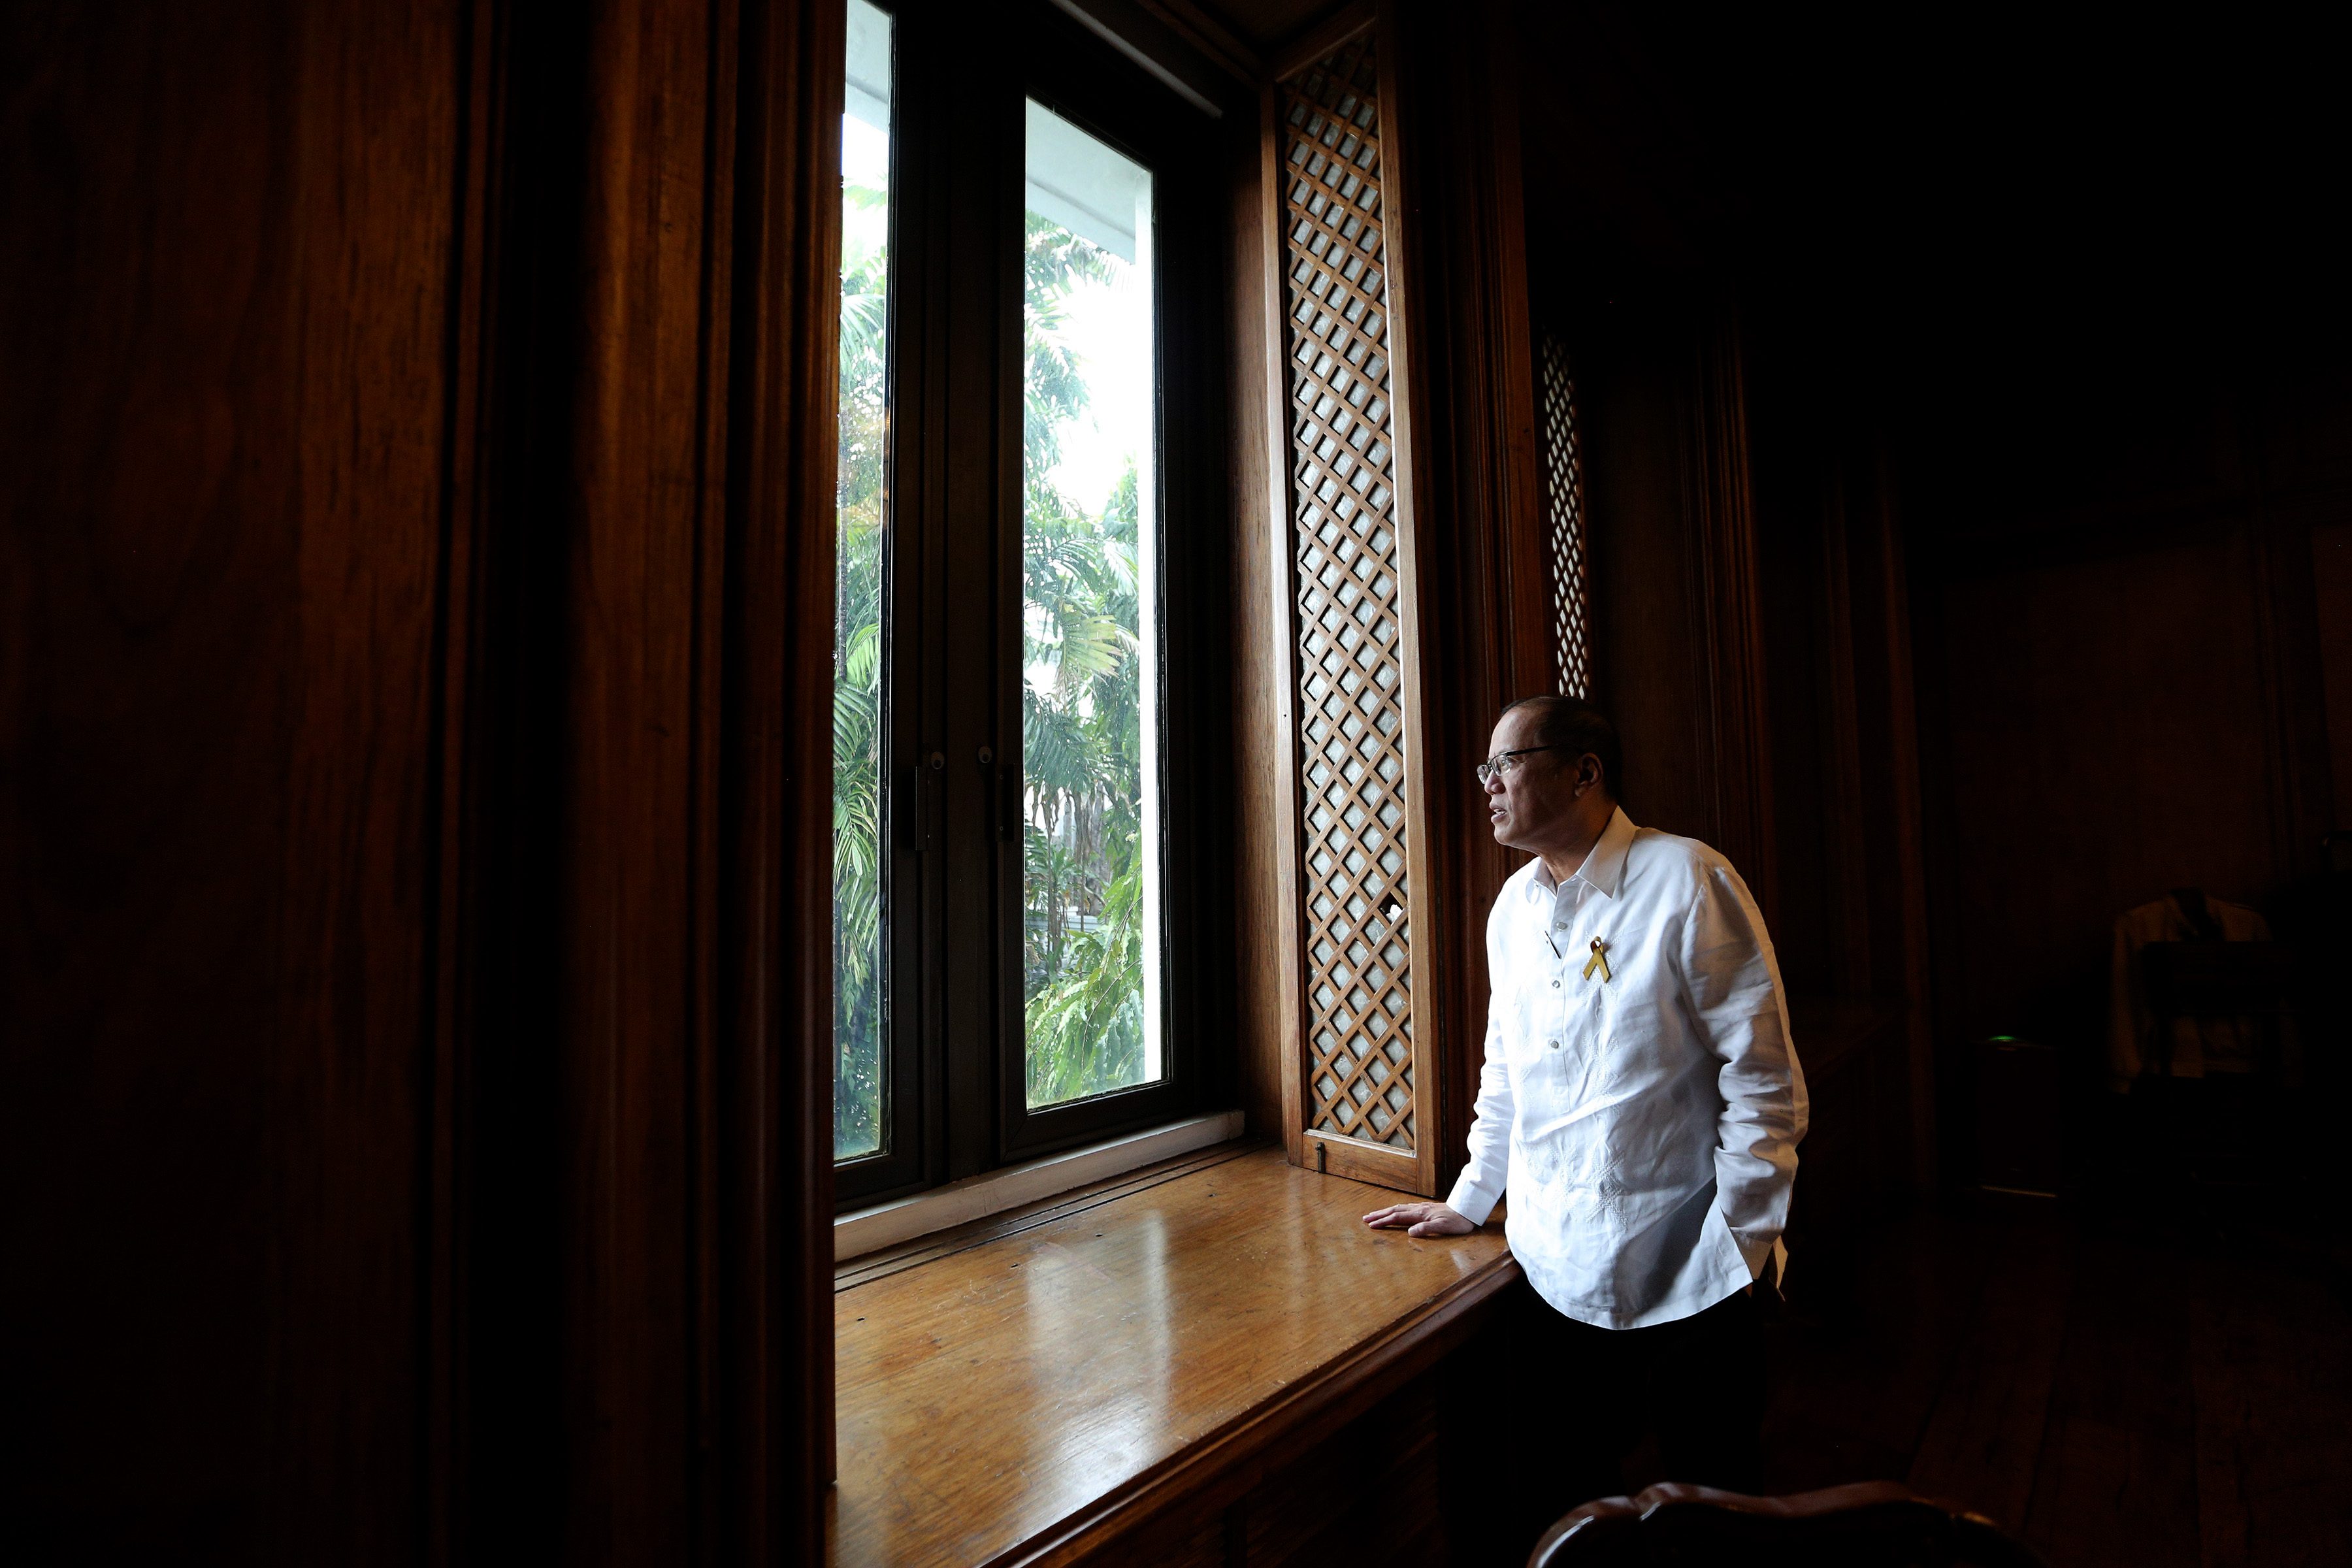 PASIG RIVER. The President enjoys viewing the river full of migratory birds as he takes a break from his everyday tasks as president of the Philippines. Photo by Joseph Vidal/Malacañang Photo Bureau 